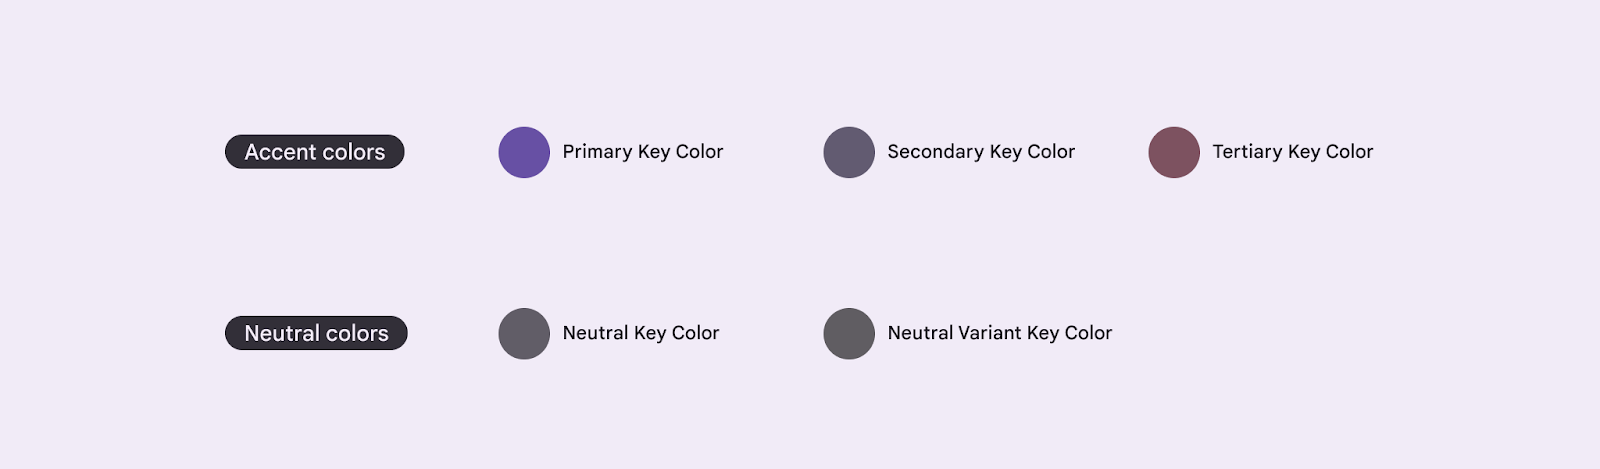 Five baseline key colors for creating an M3 theming.